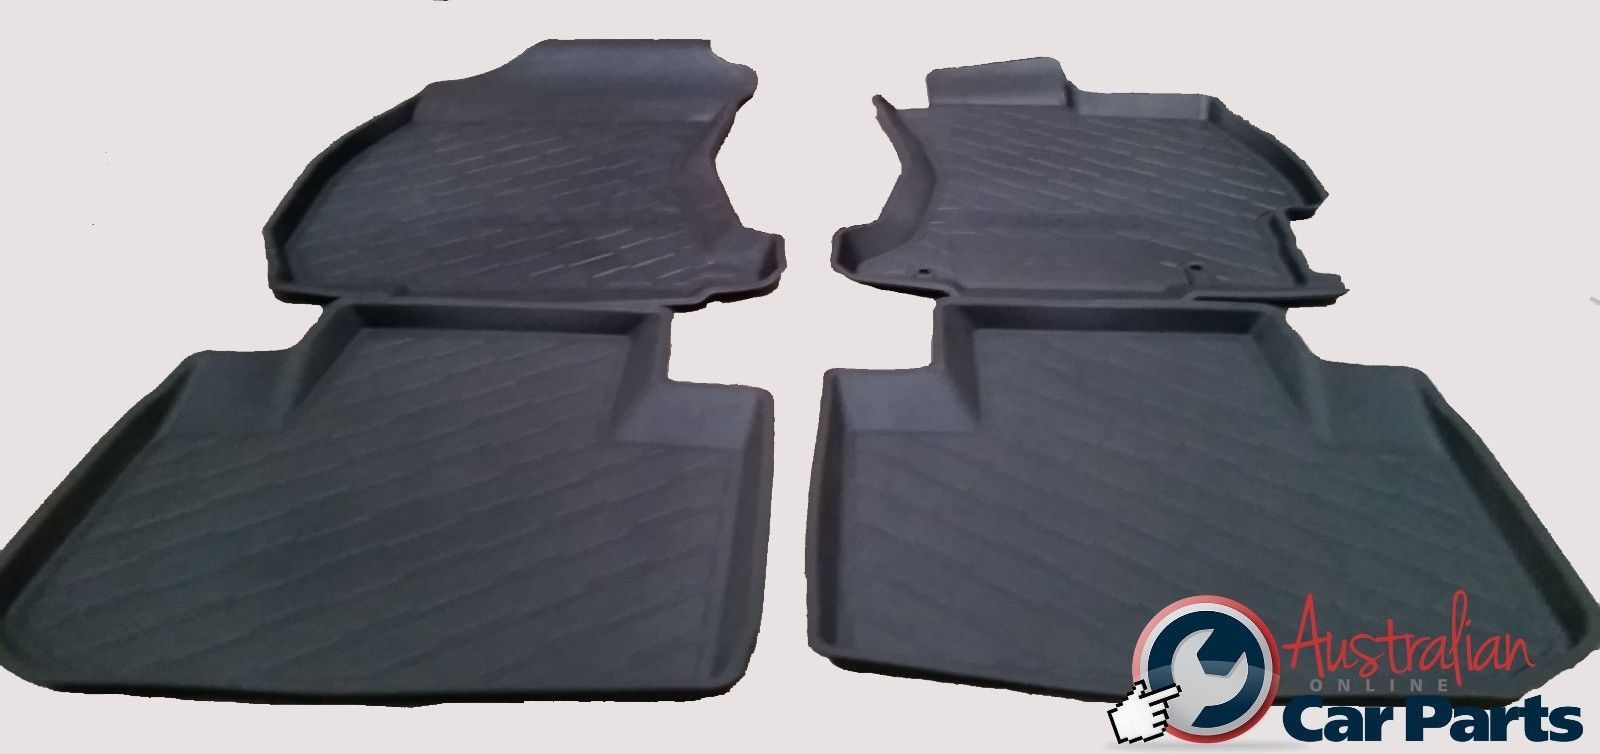 Rubber Floor Mats Suitable For Subaru Forester 2008 2013 Genuine